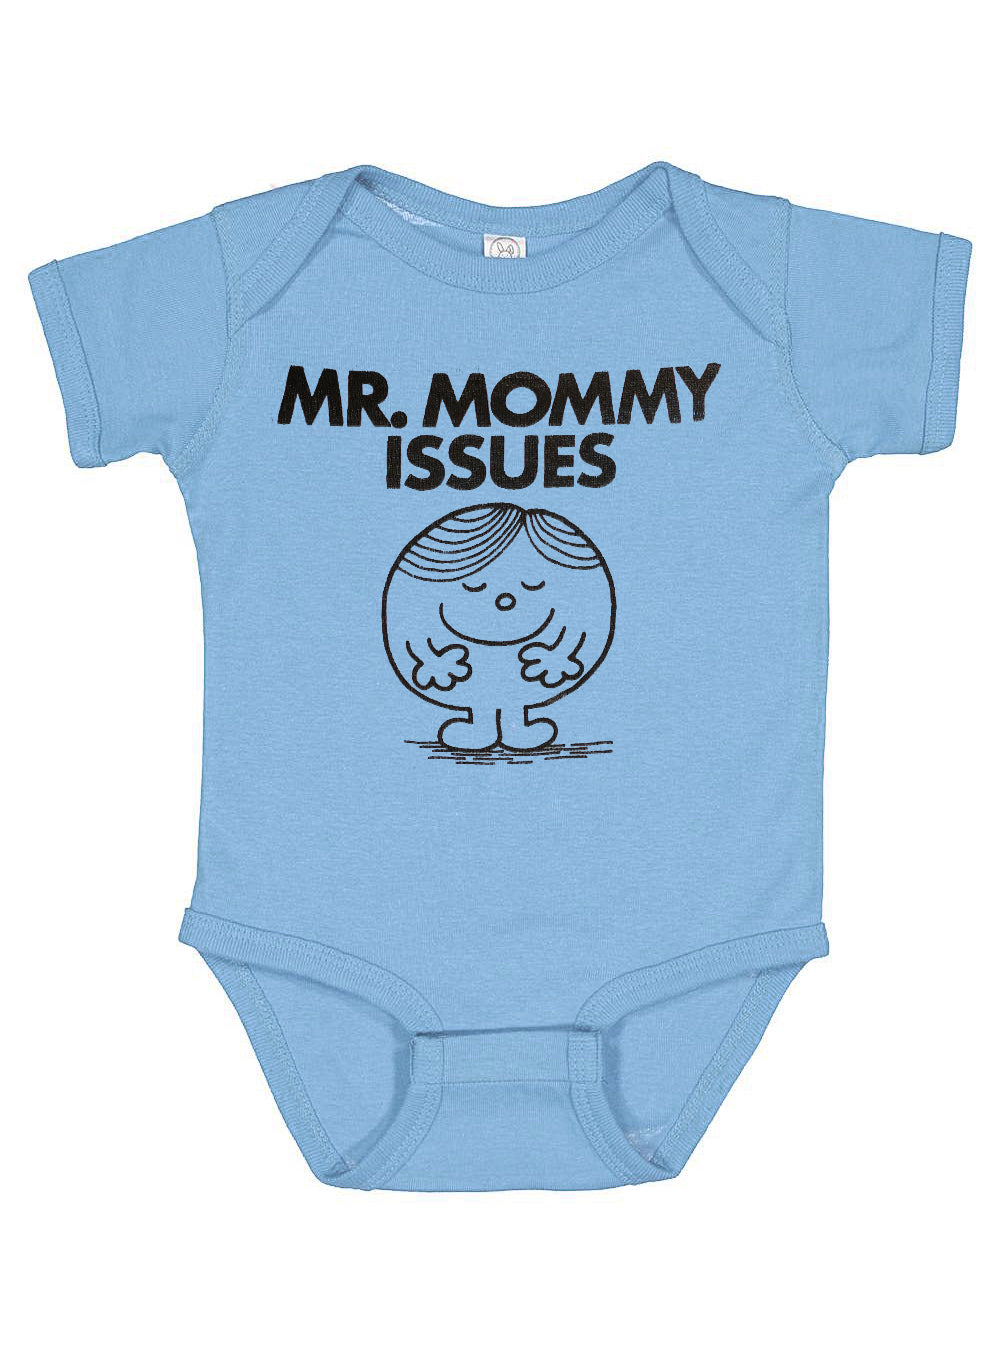 Mr. Mommy Issues Baby Onesie